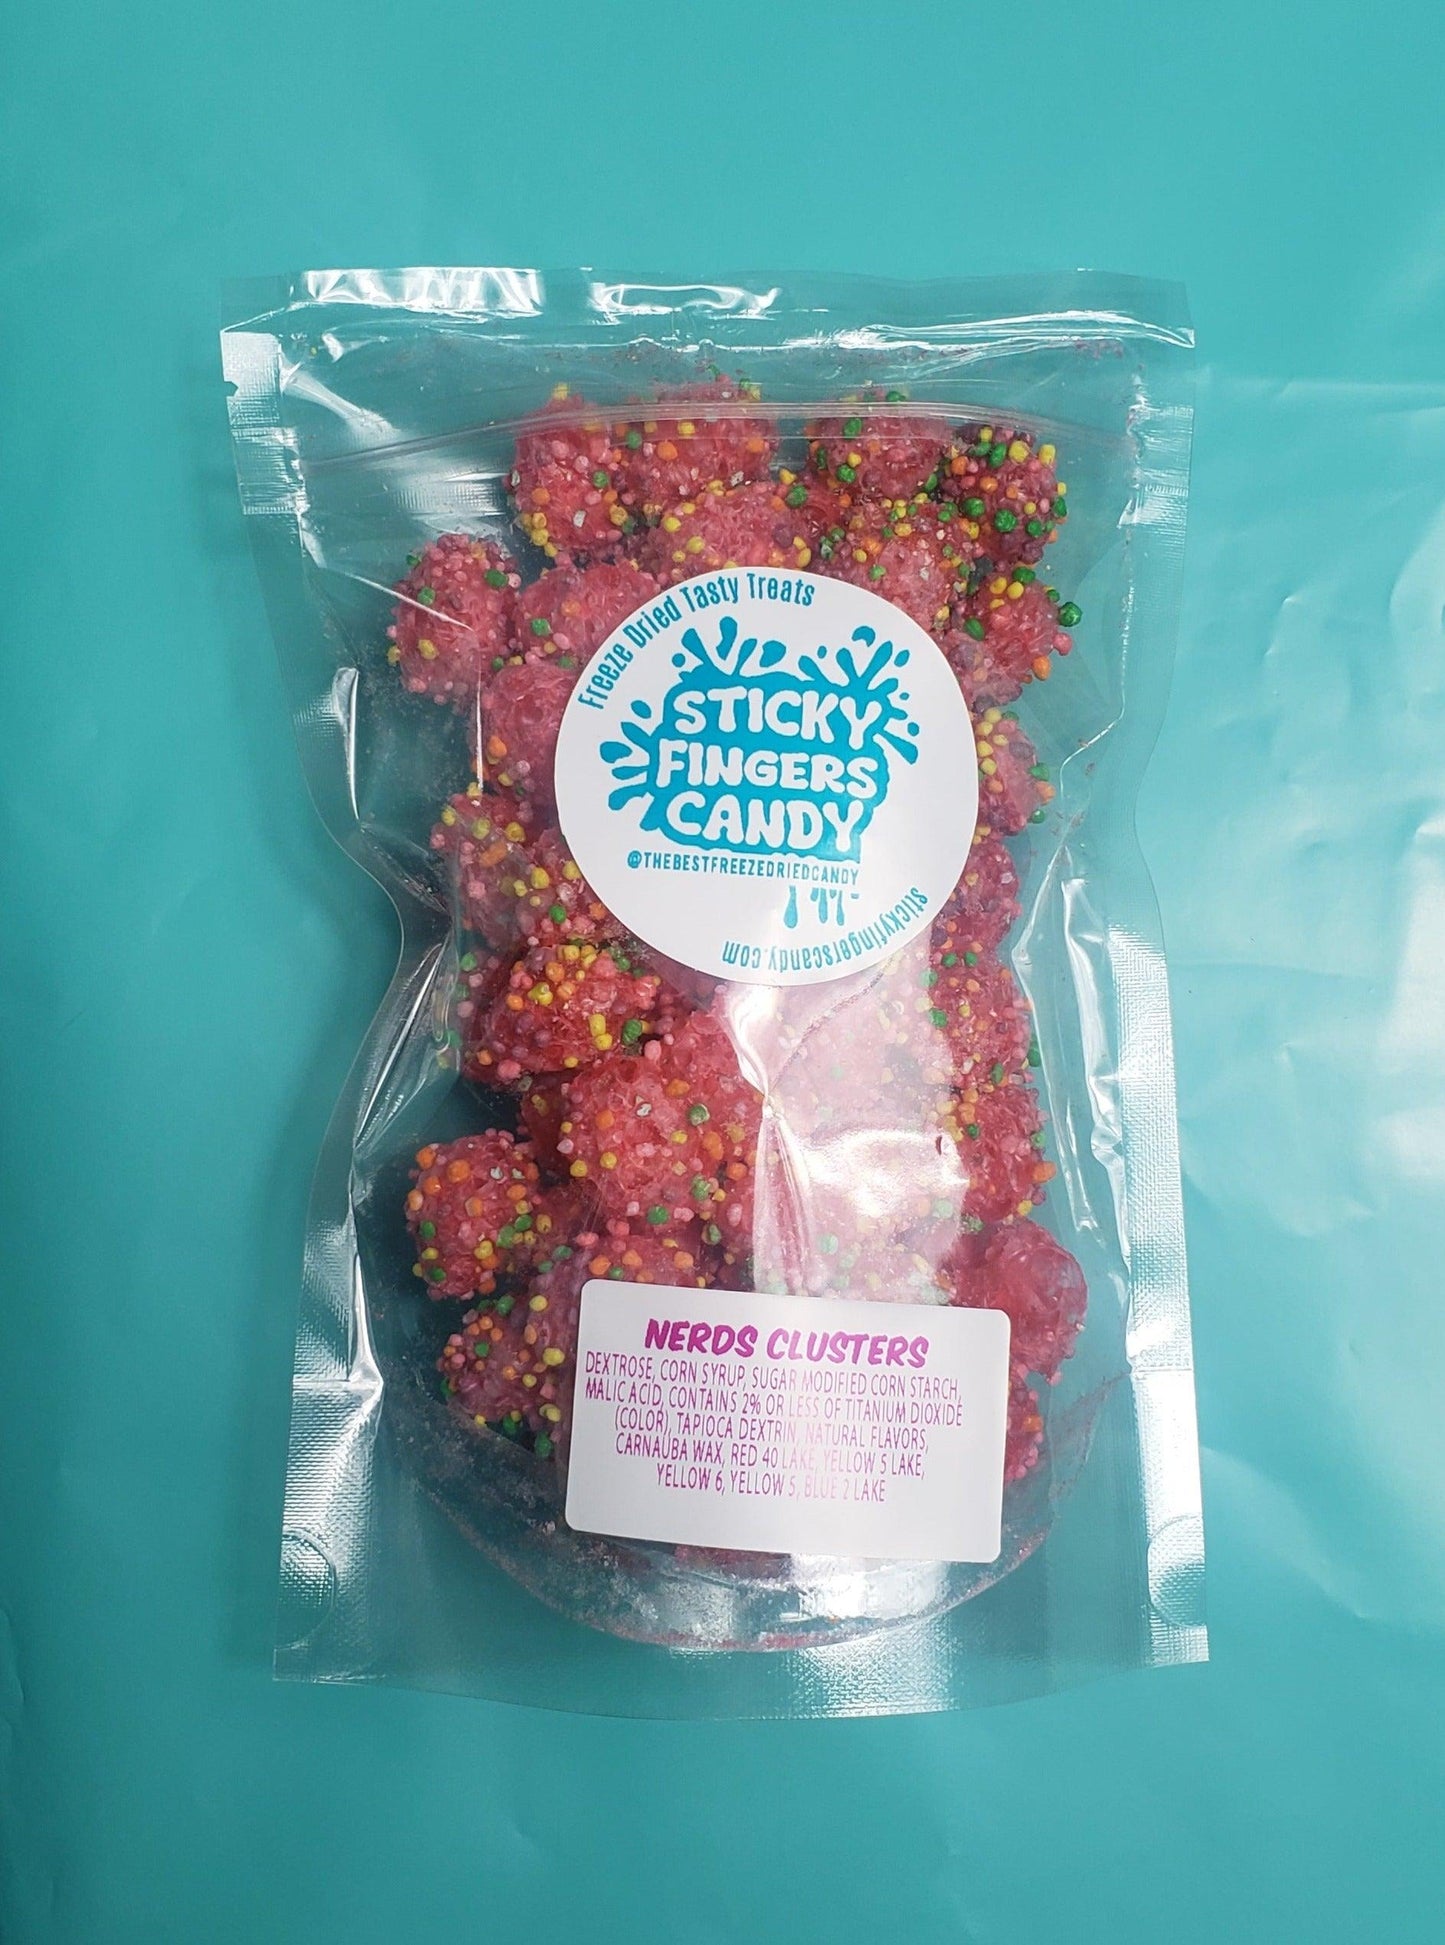 Nerds Clusters - Original Flavor - Sticky Fingers Candy - Freeze Dried Tasty Treats